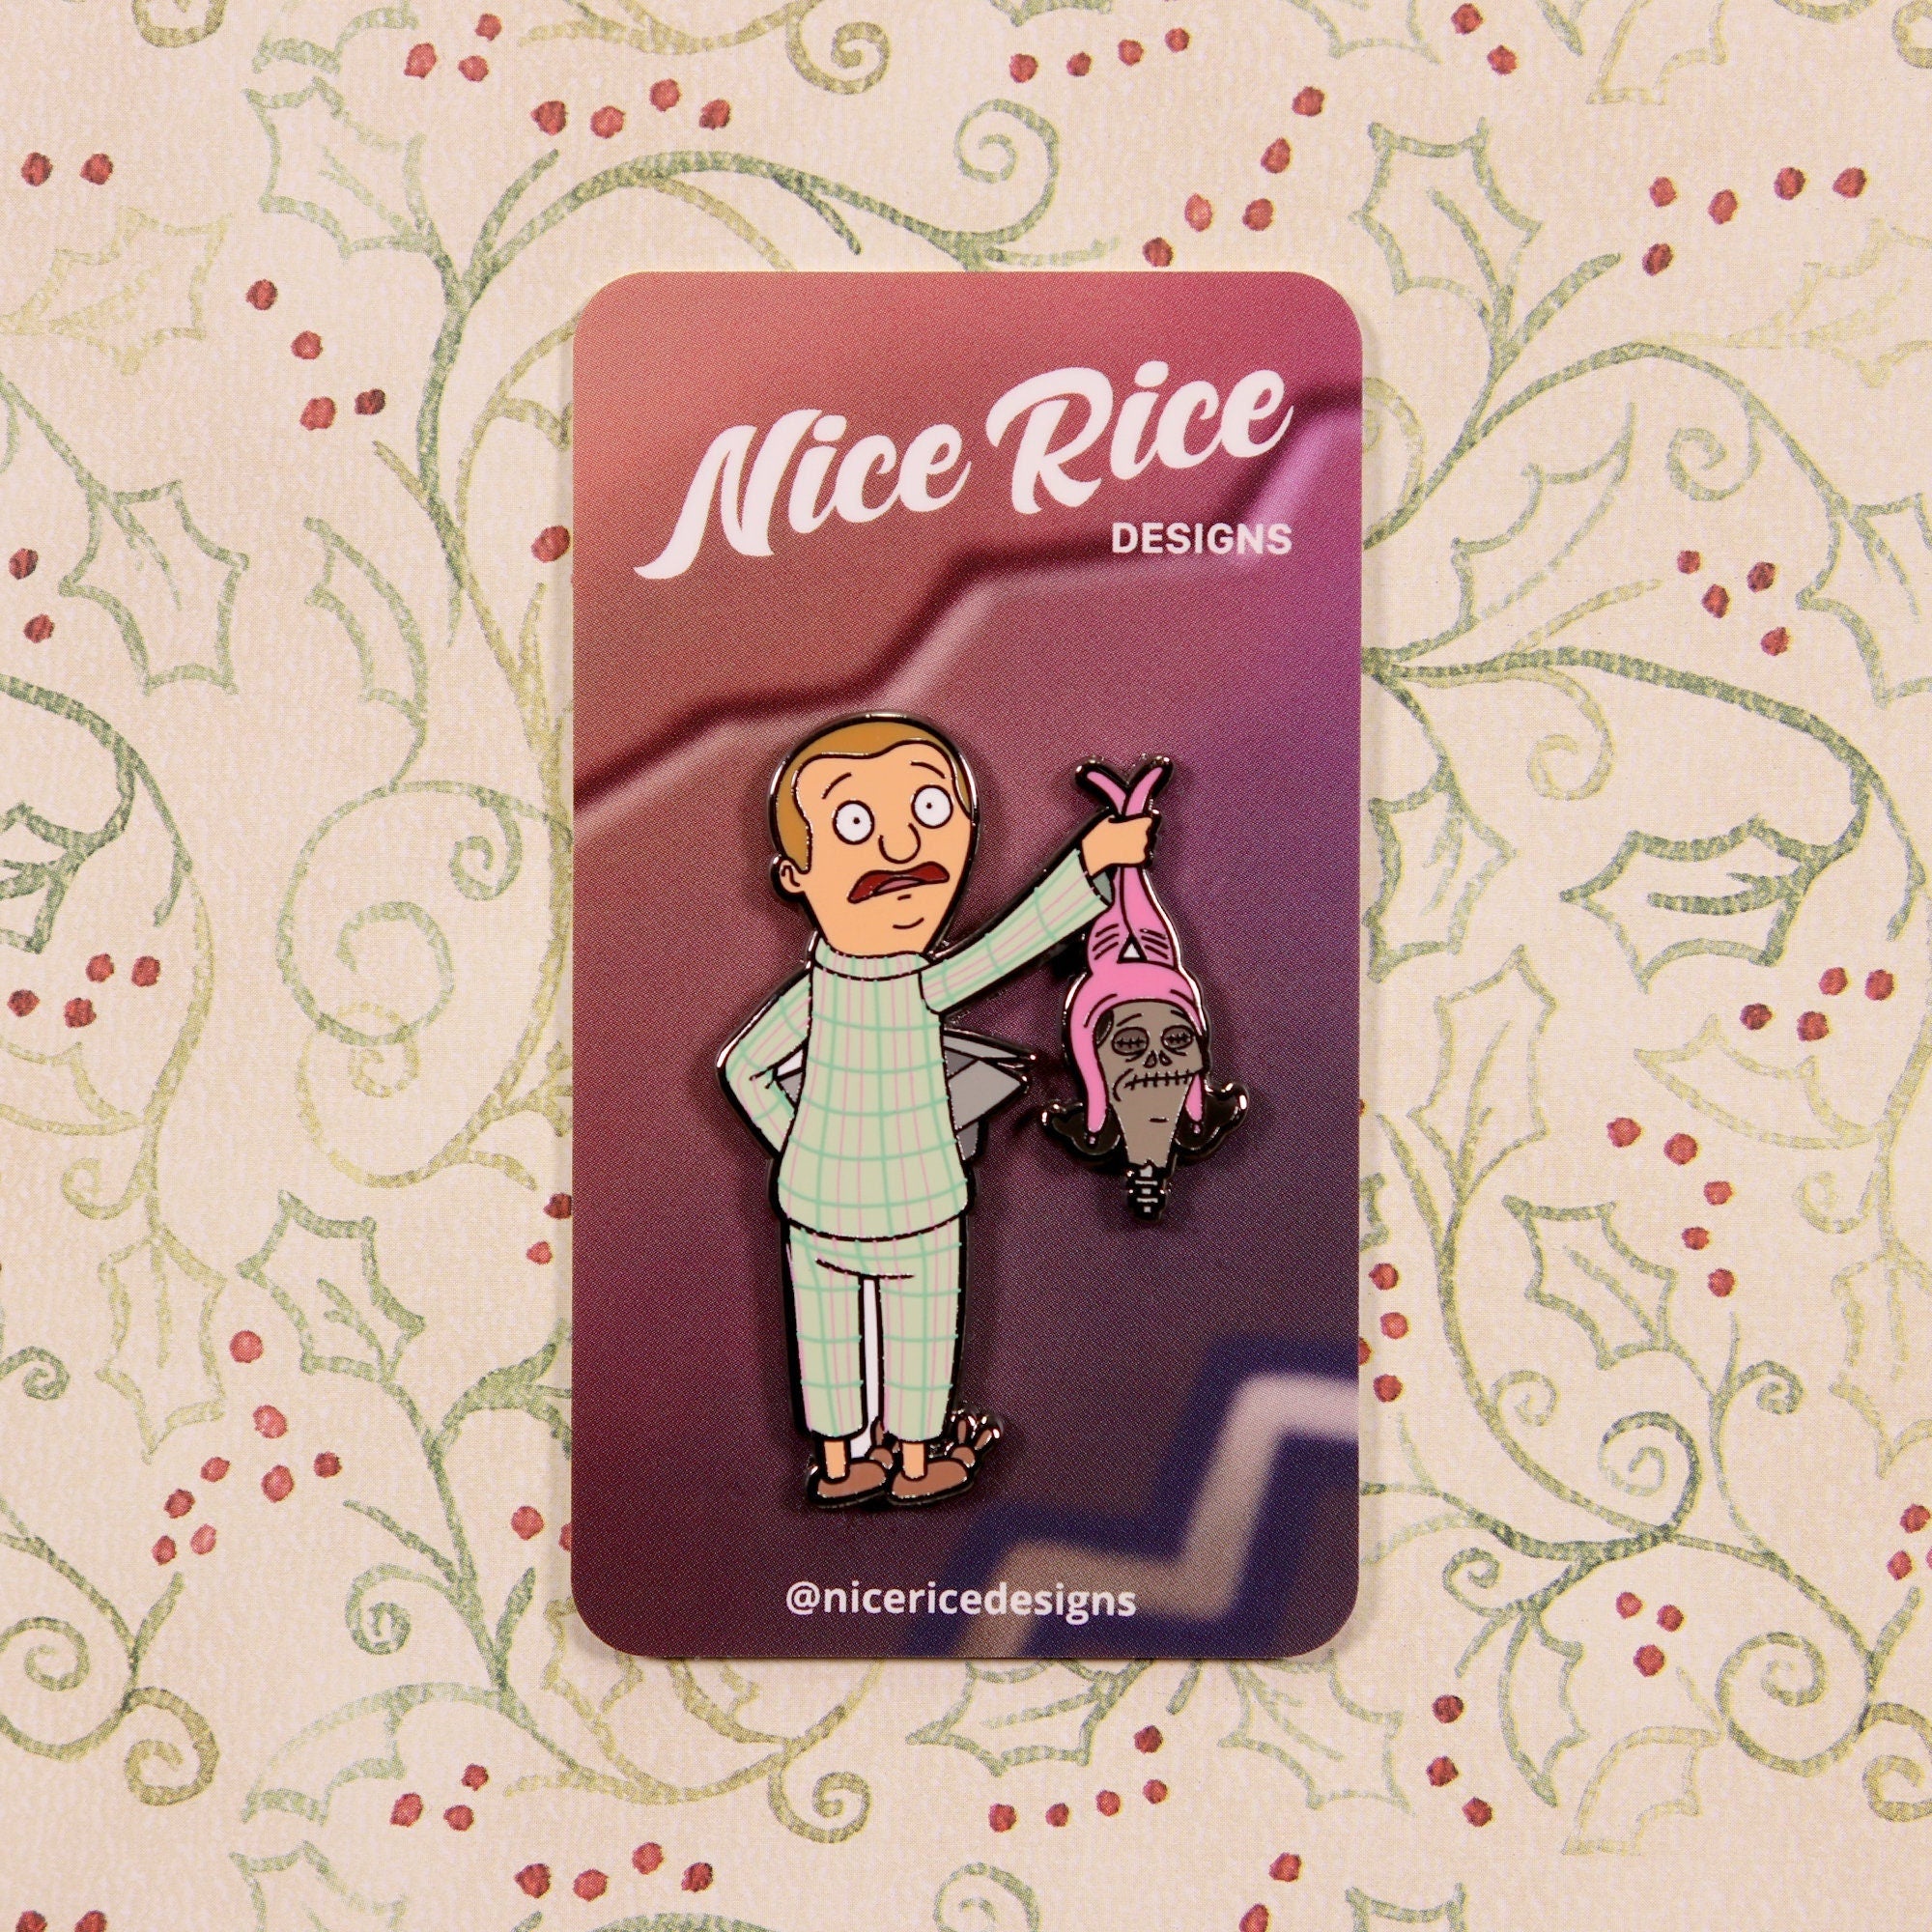 The Present Pin by Nice Rice Designs